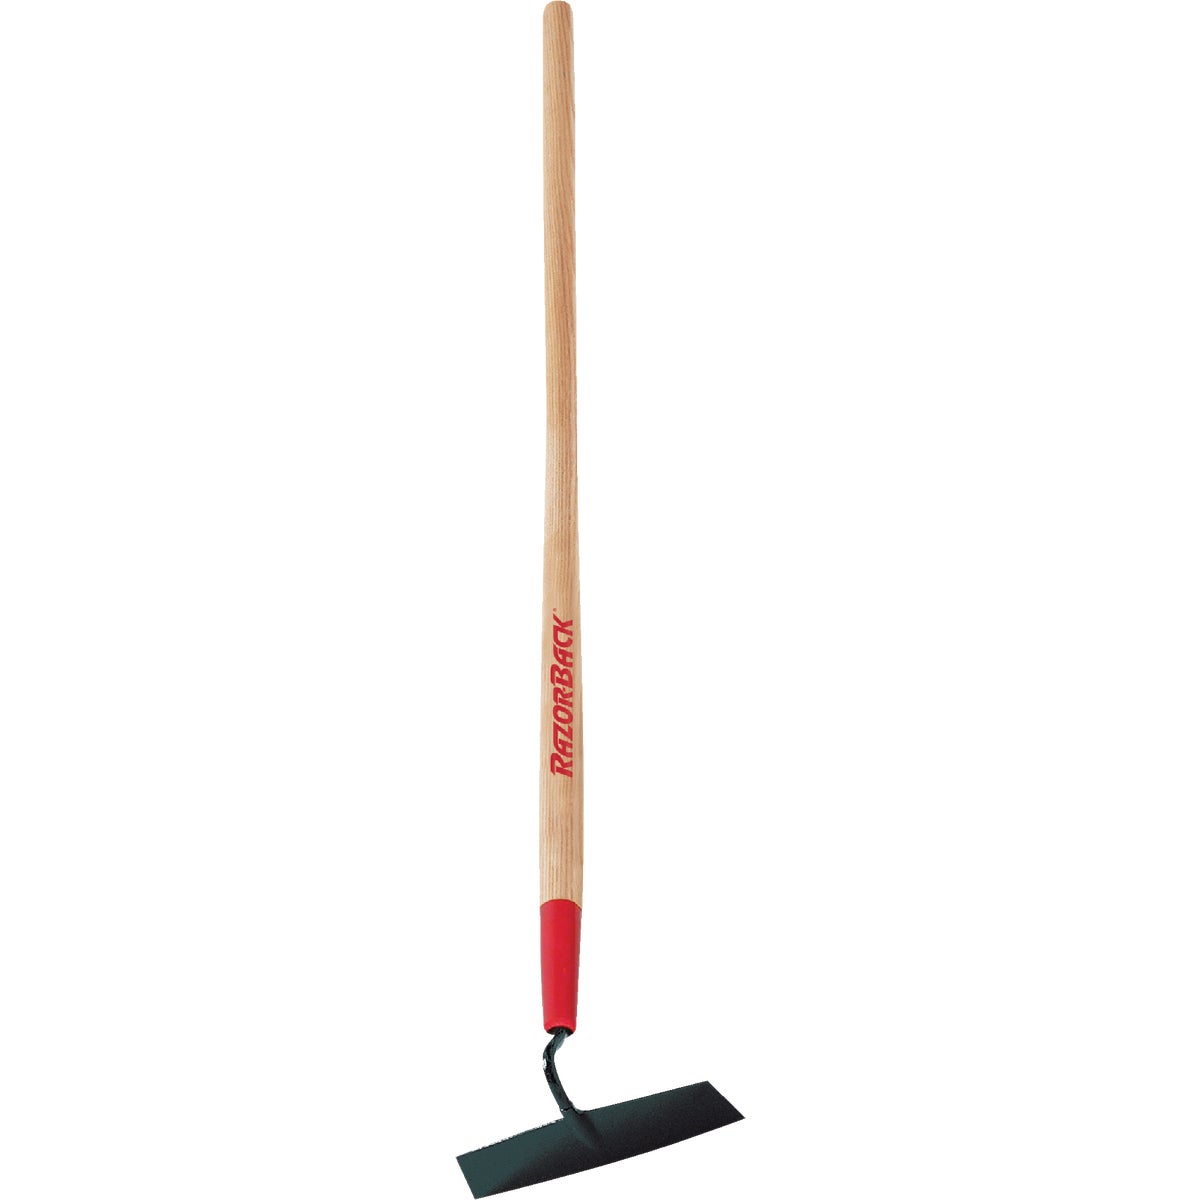 Item 701814, Razor-Back Onion hoe is Ideal for chopping, clearing garden growth, 